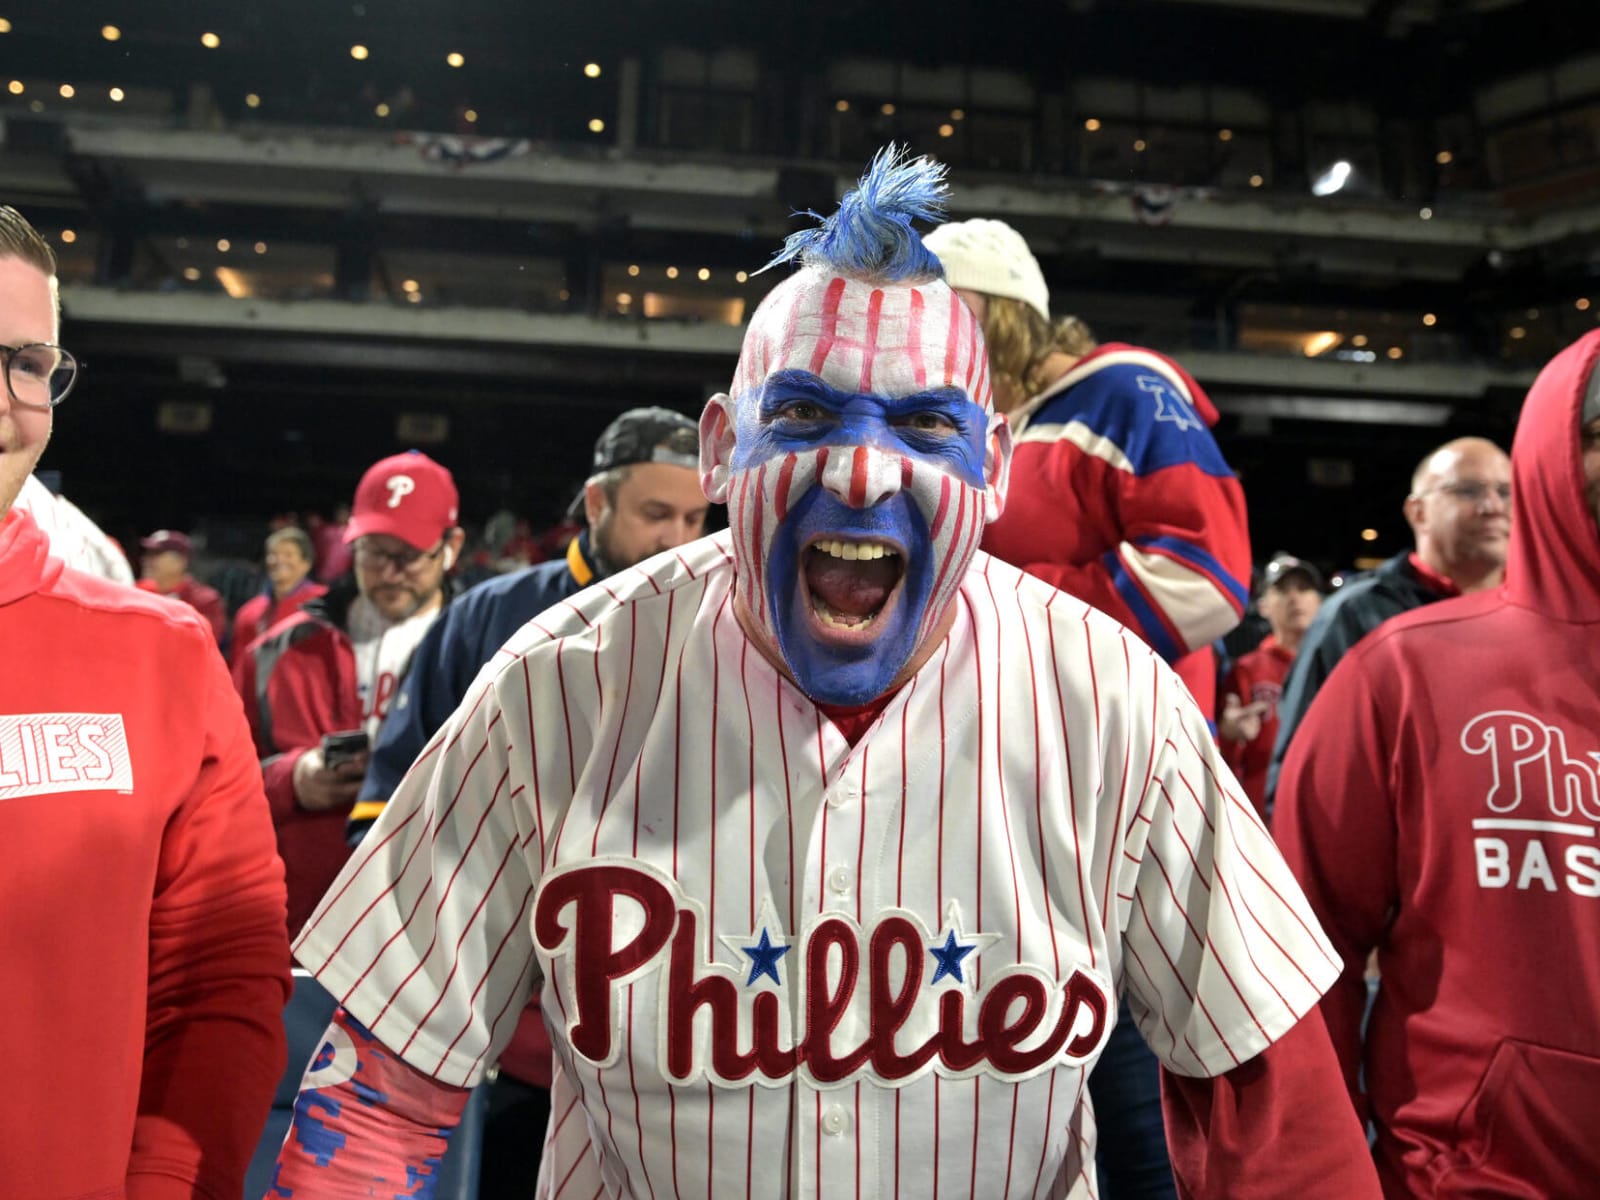 SB Nation FanPulse Poll: Phillies fans want more moves - The Good